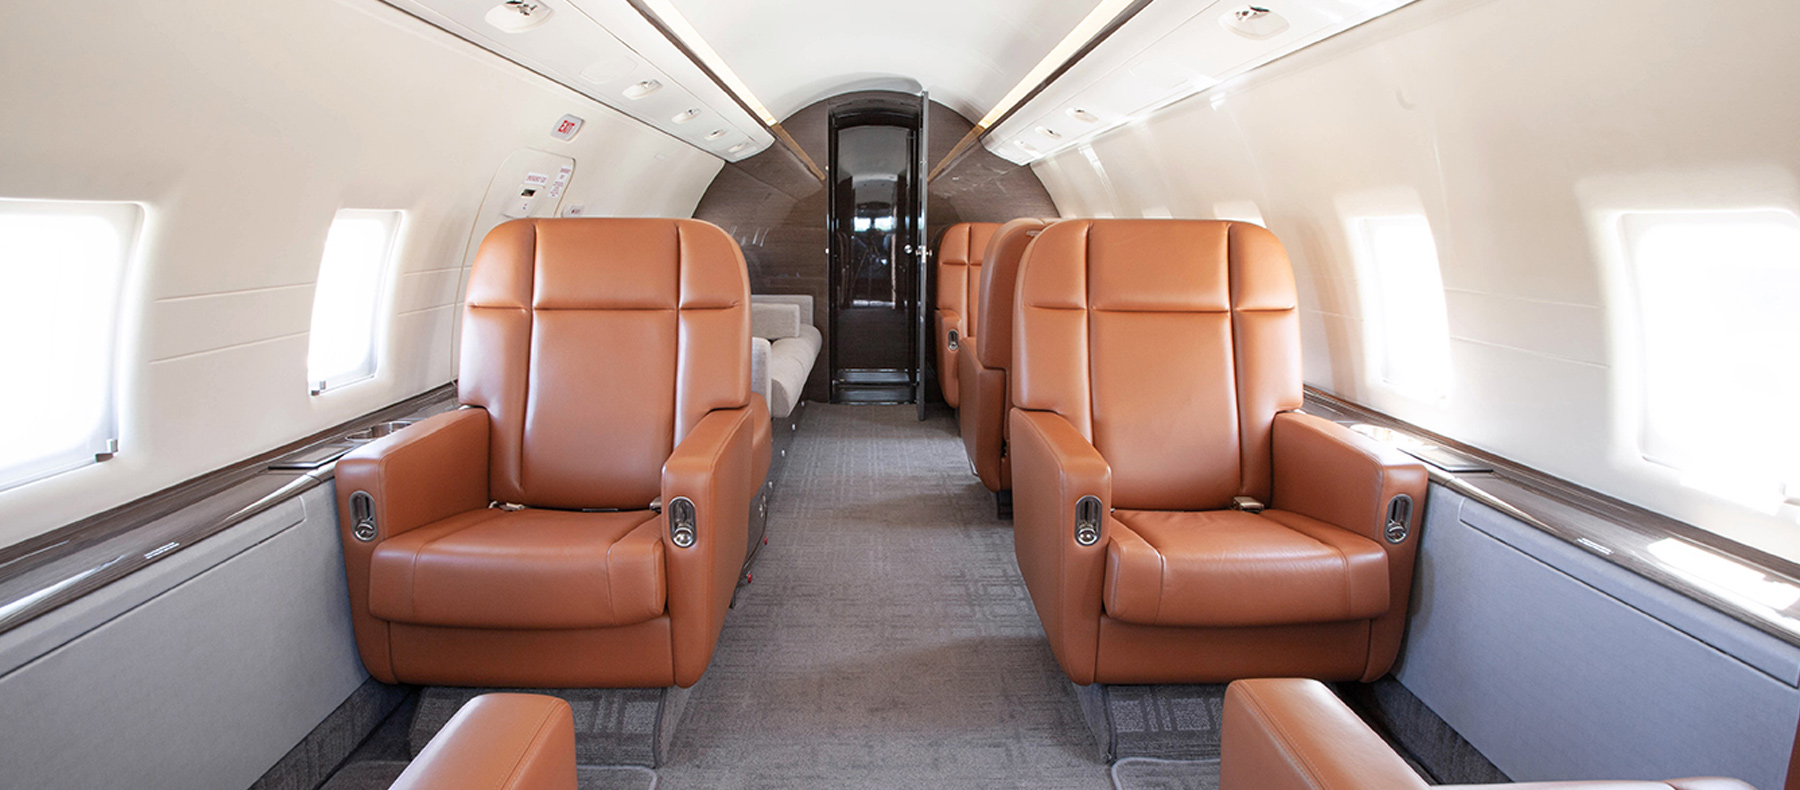 Cabin of a Challenger 604 at Priester Aviation.